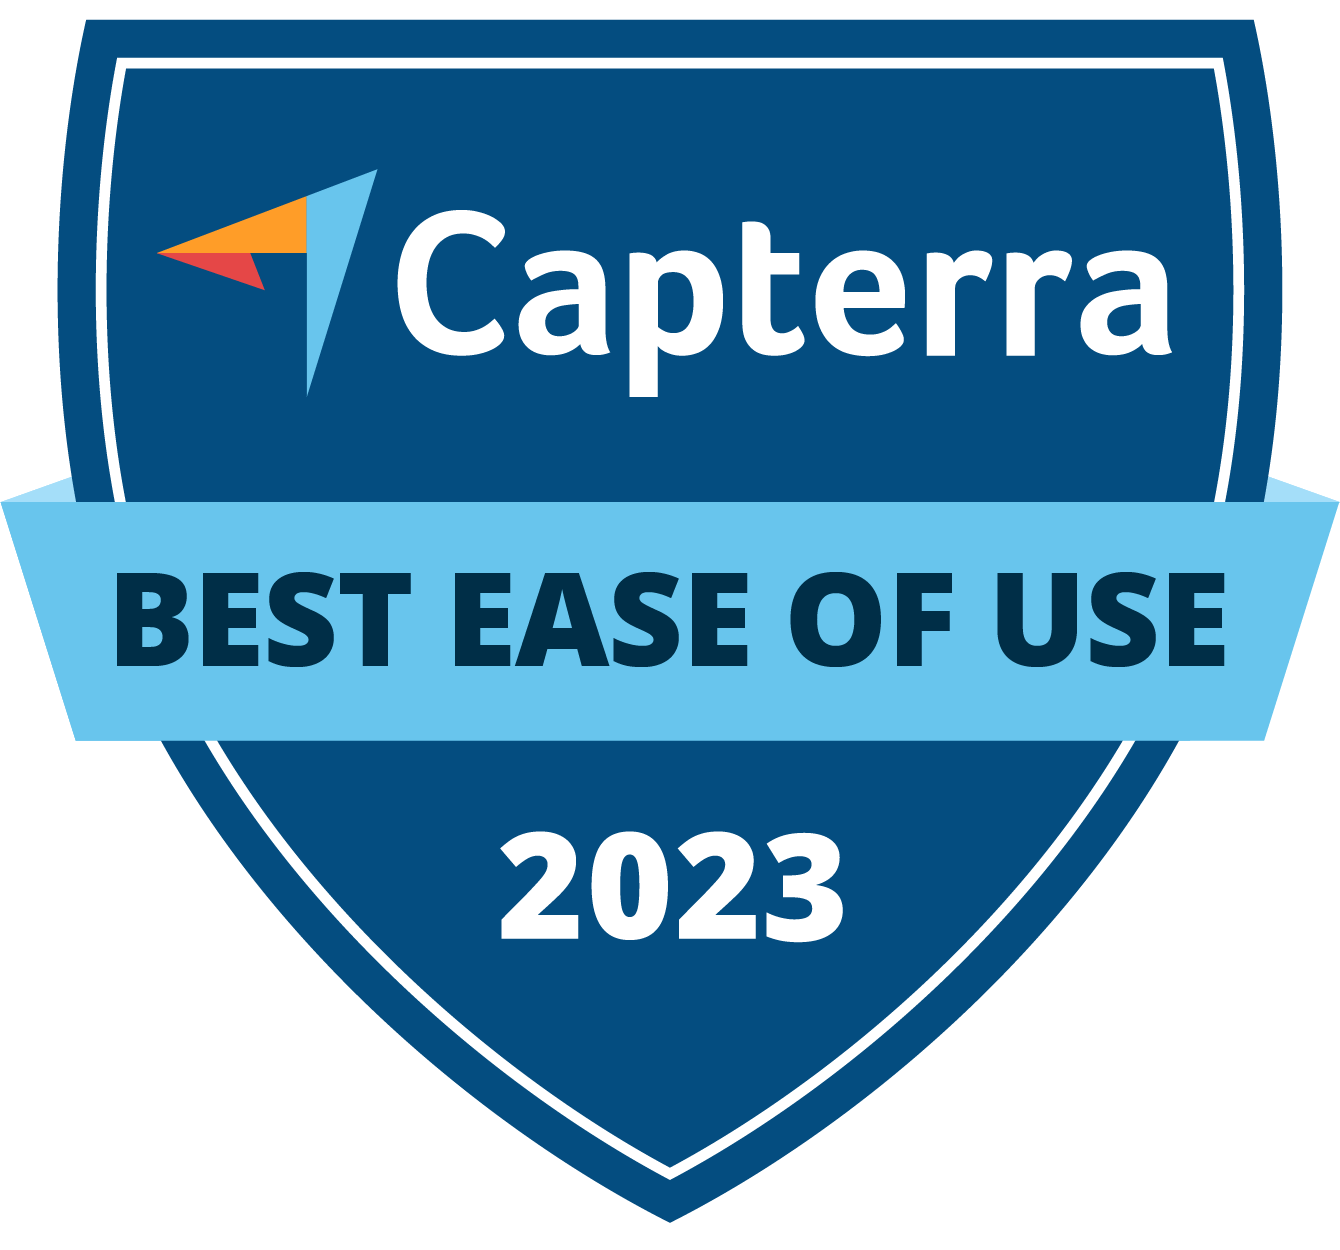 capterra best ease of use 2023